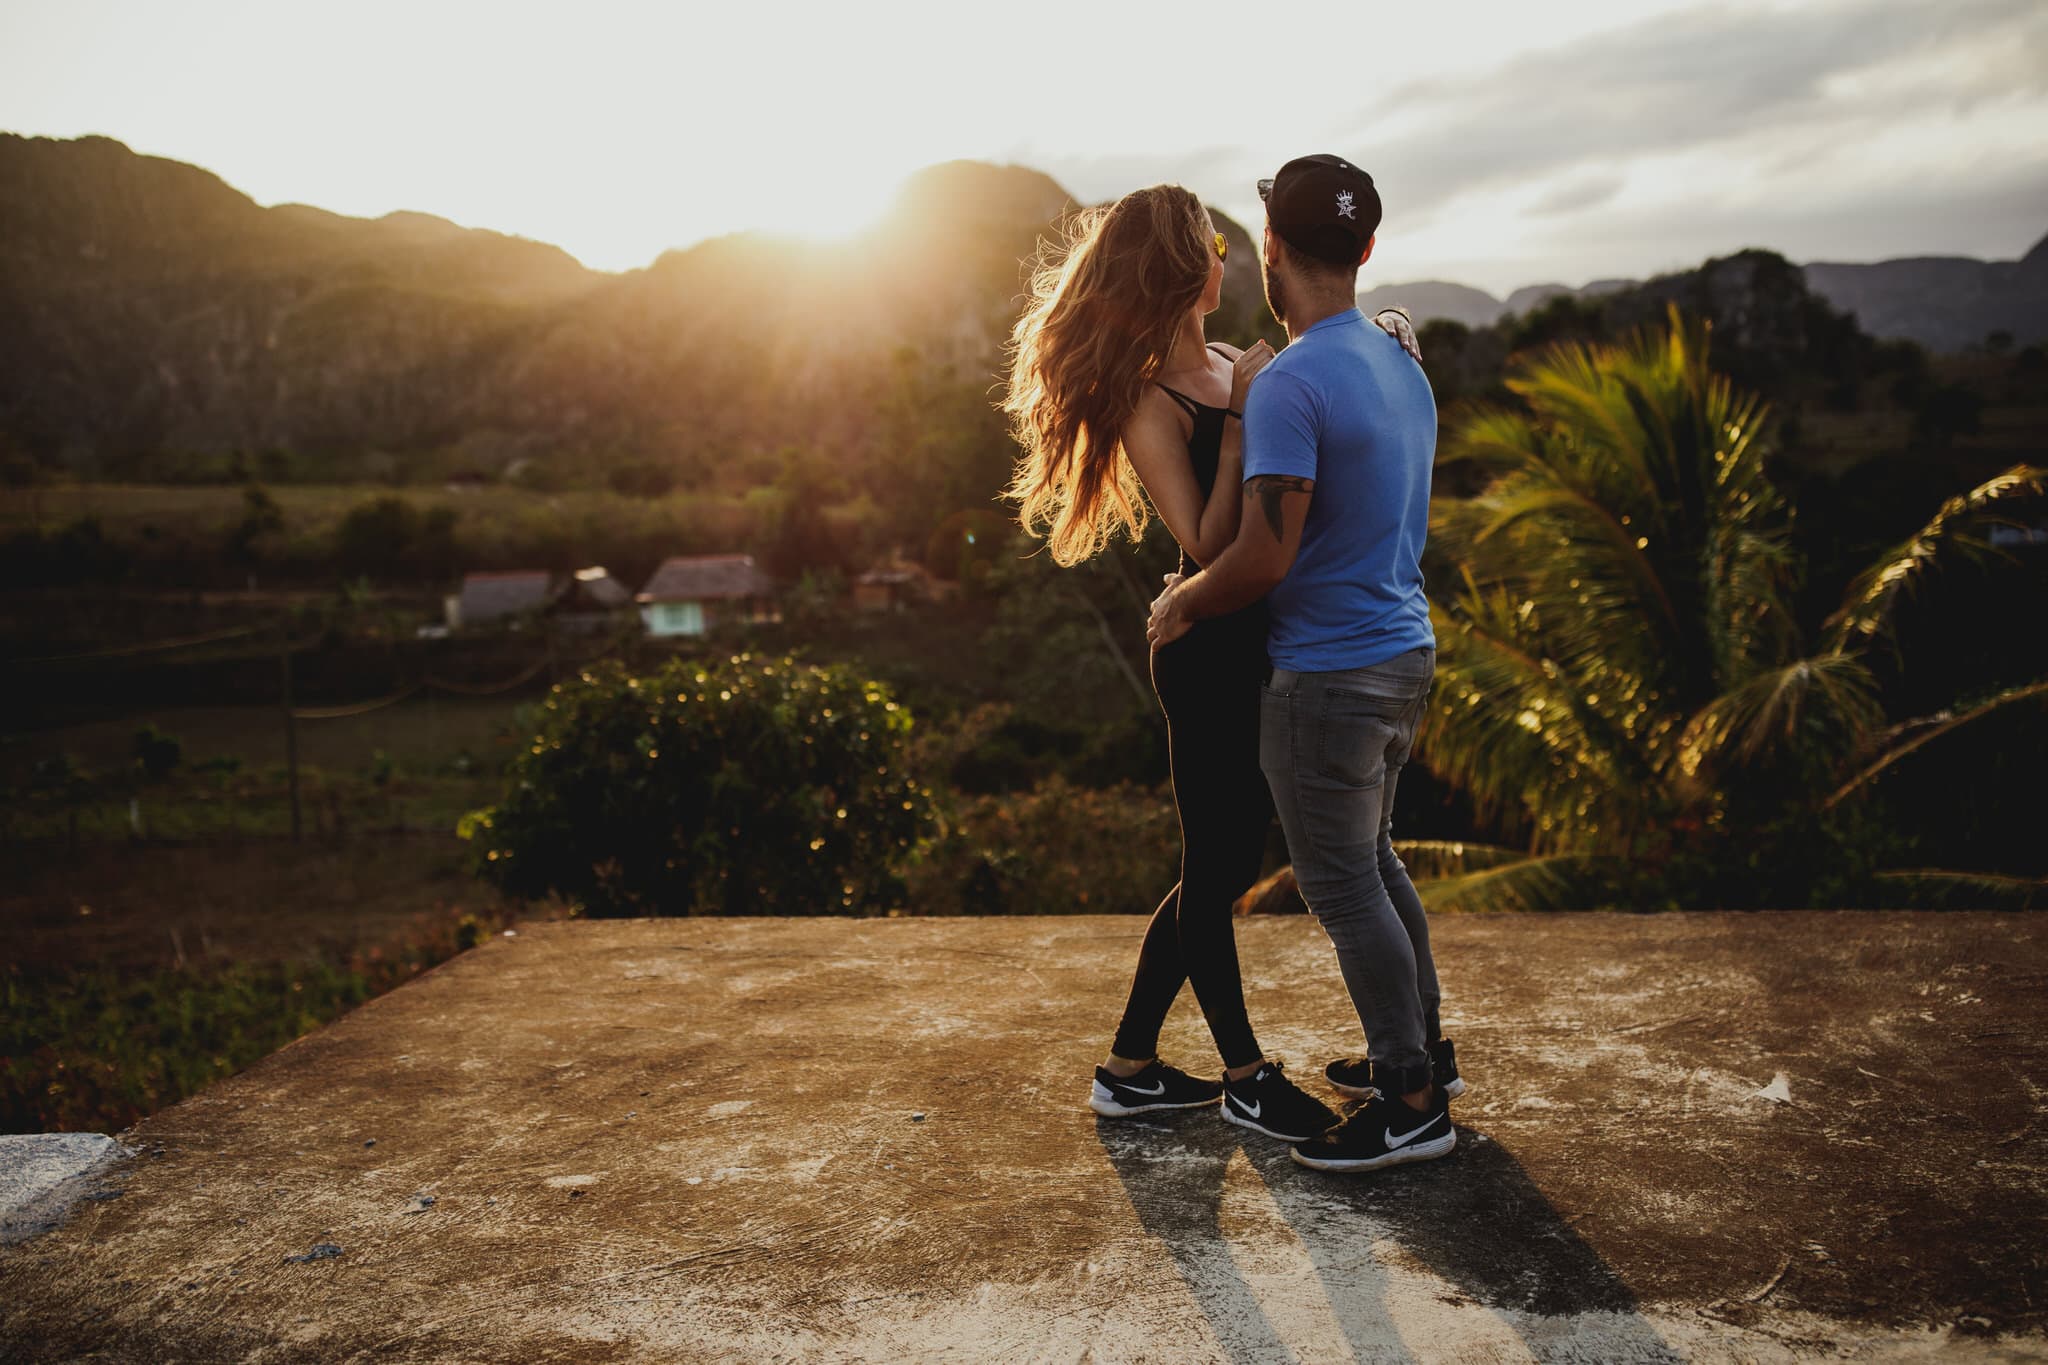 Dancing at sunset in the countryside of Vinales, Cuba. Wedding and travel photographer Brent Calis.